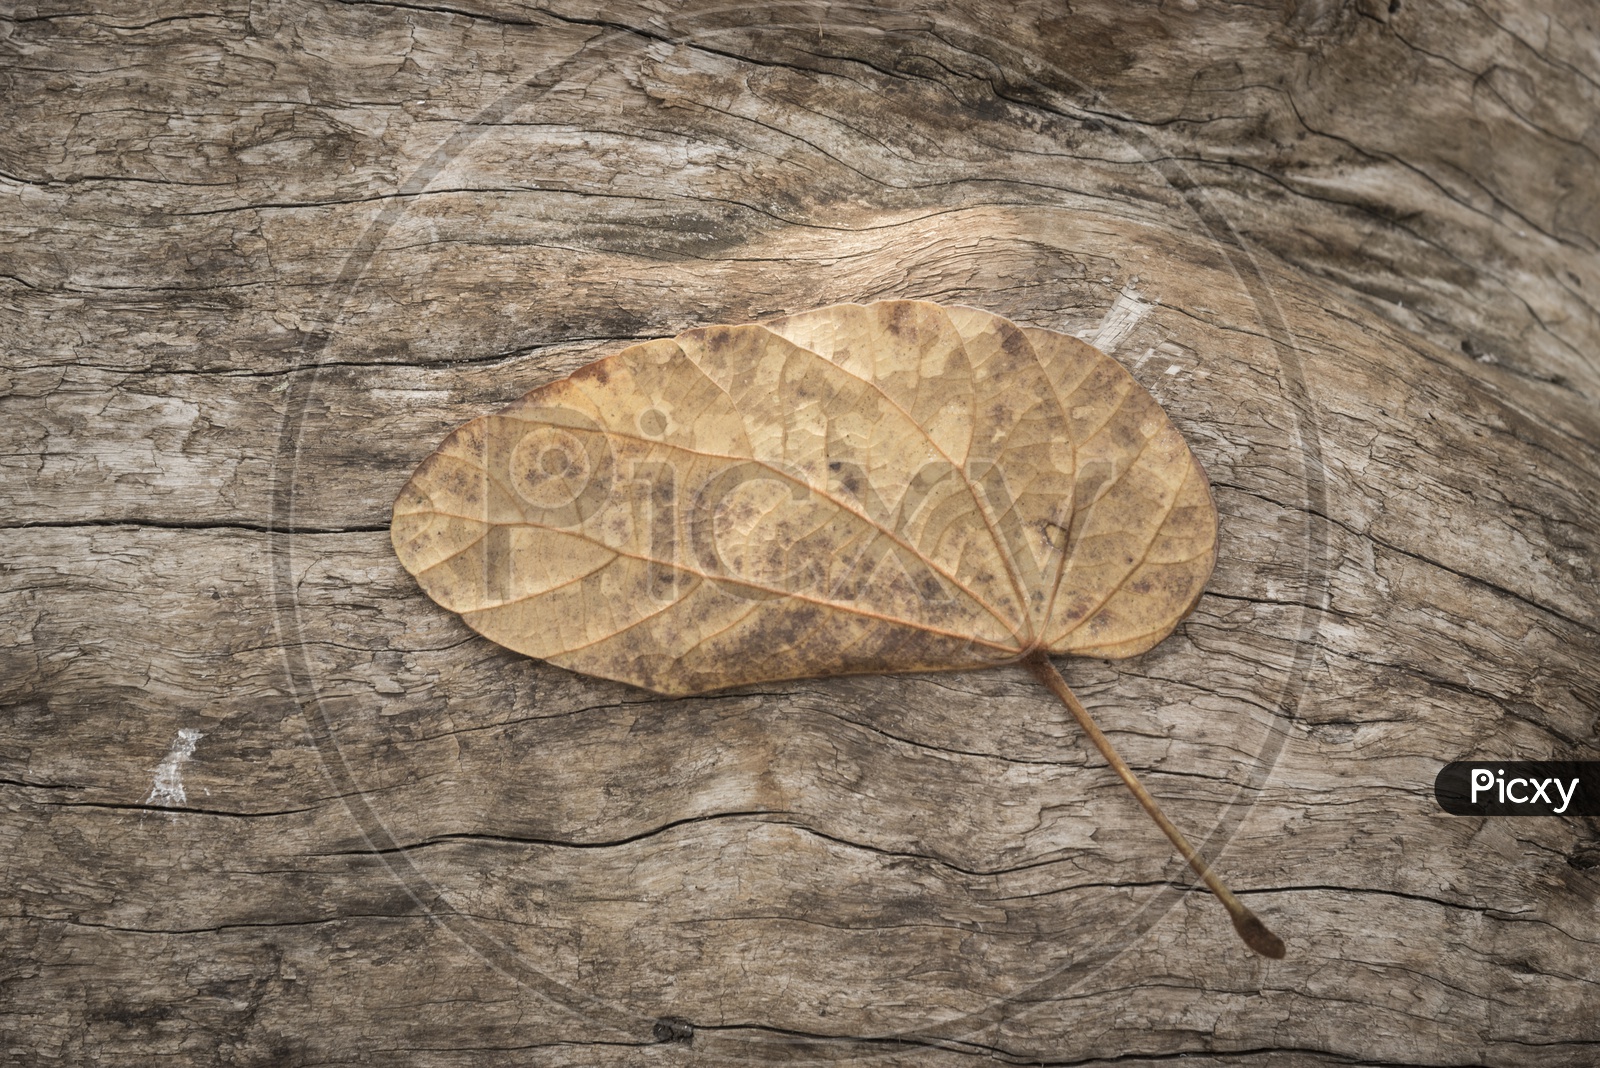 A gold colour leaf on the wood